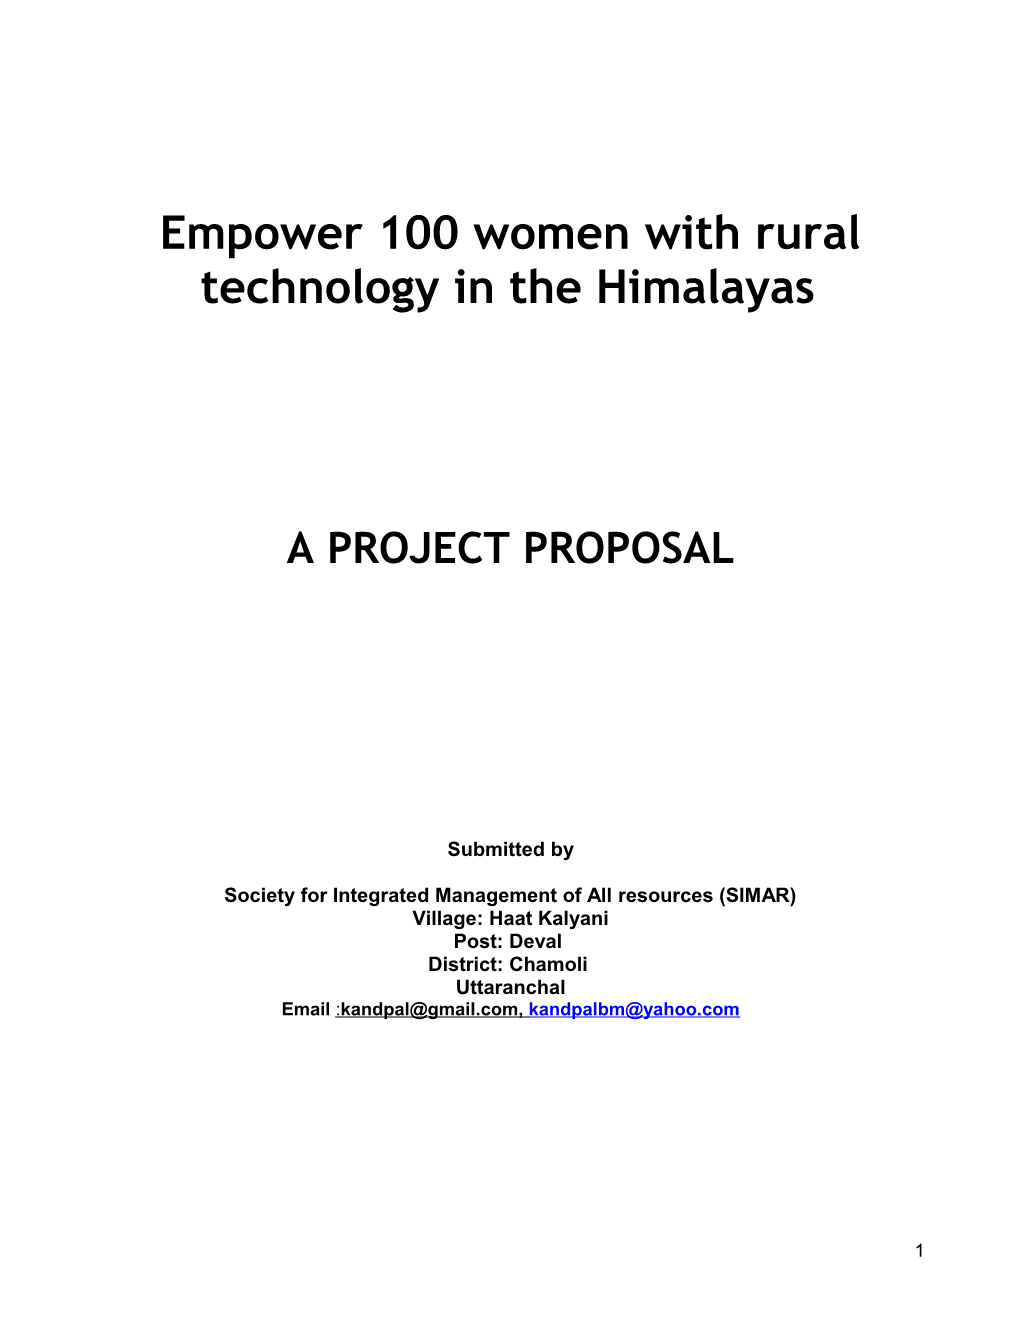 Promoting Appropriate Rural Technologies